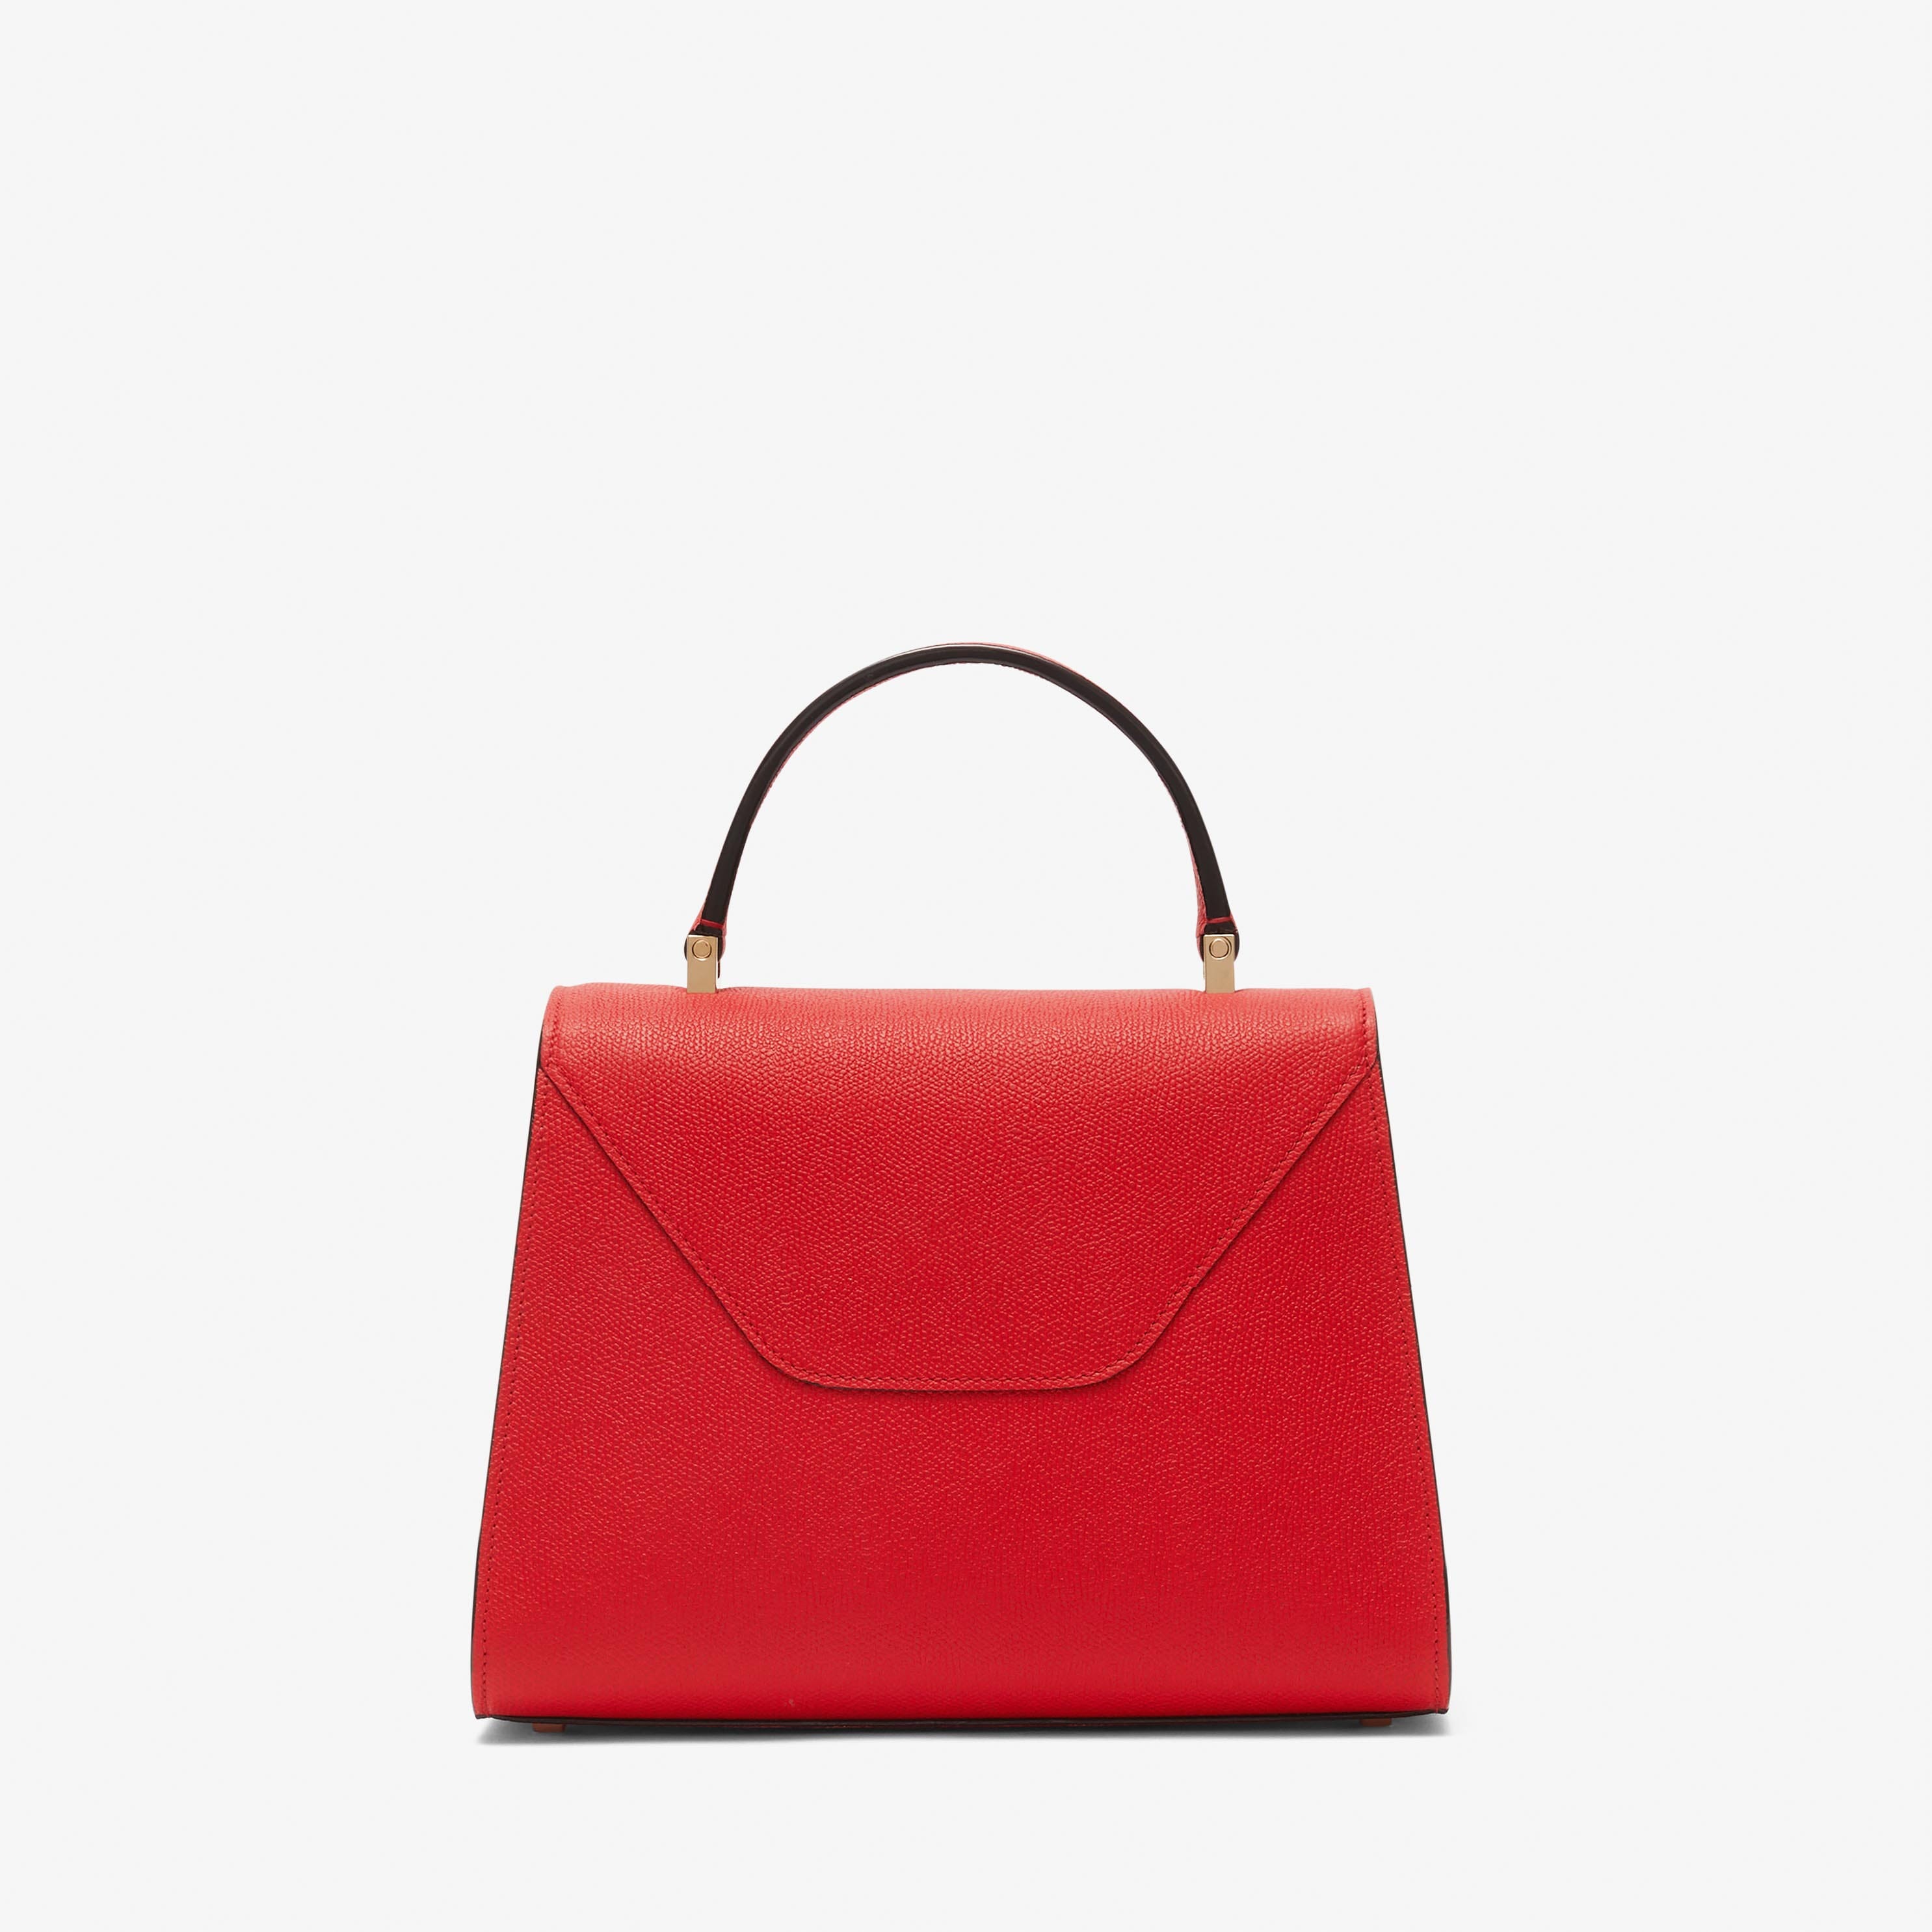 Women's Red Leather Medium top handle bag | Valextra Iside